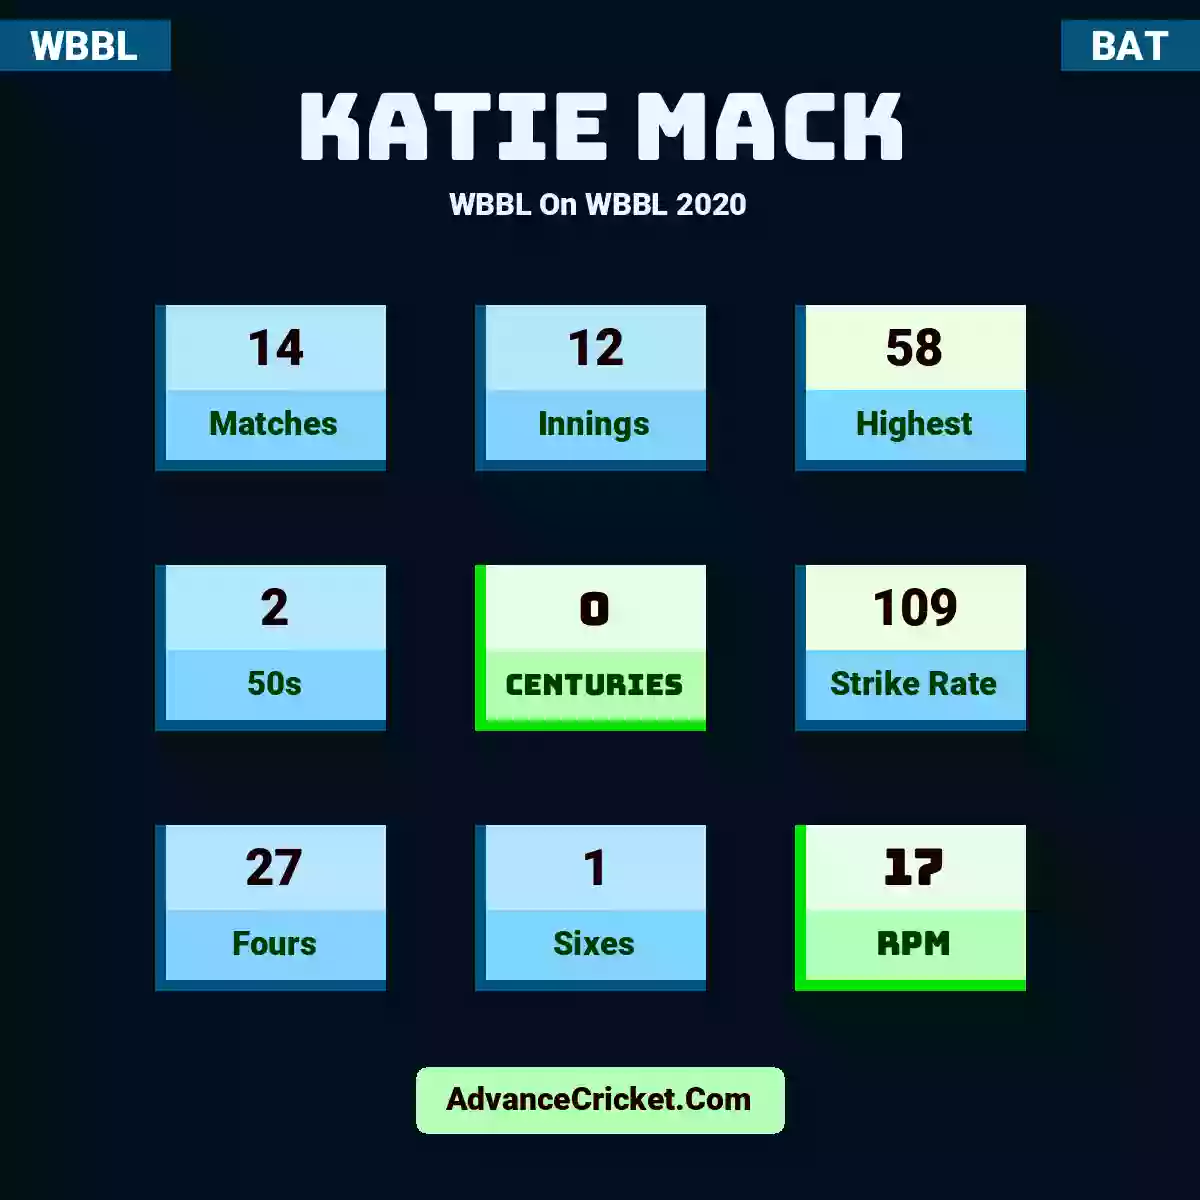 Katie Mack WBBL  On WBBL 2020, Katie Mack played 14 matches, scored 58 runs as highest, 2 half-centuries, and 0 centuries, with a strike rate of 109. K.Mack hit 27 fours and 1 sixes, with an RPM of 17.